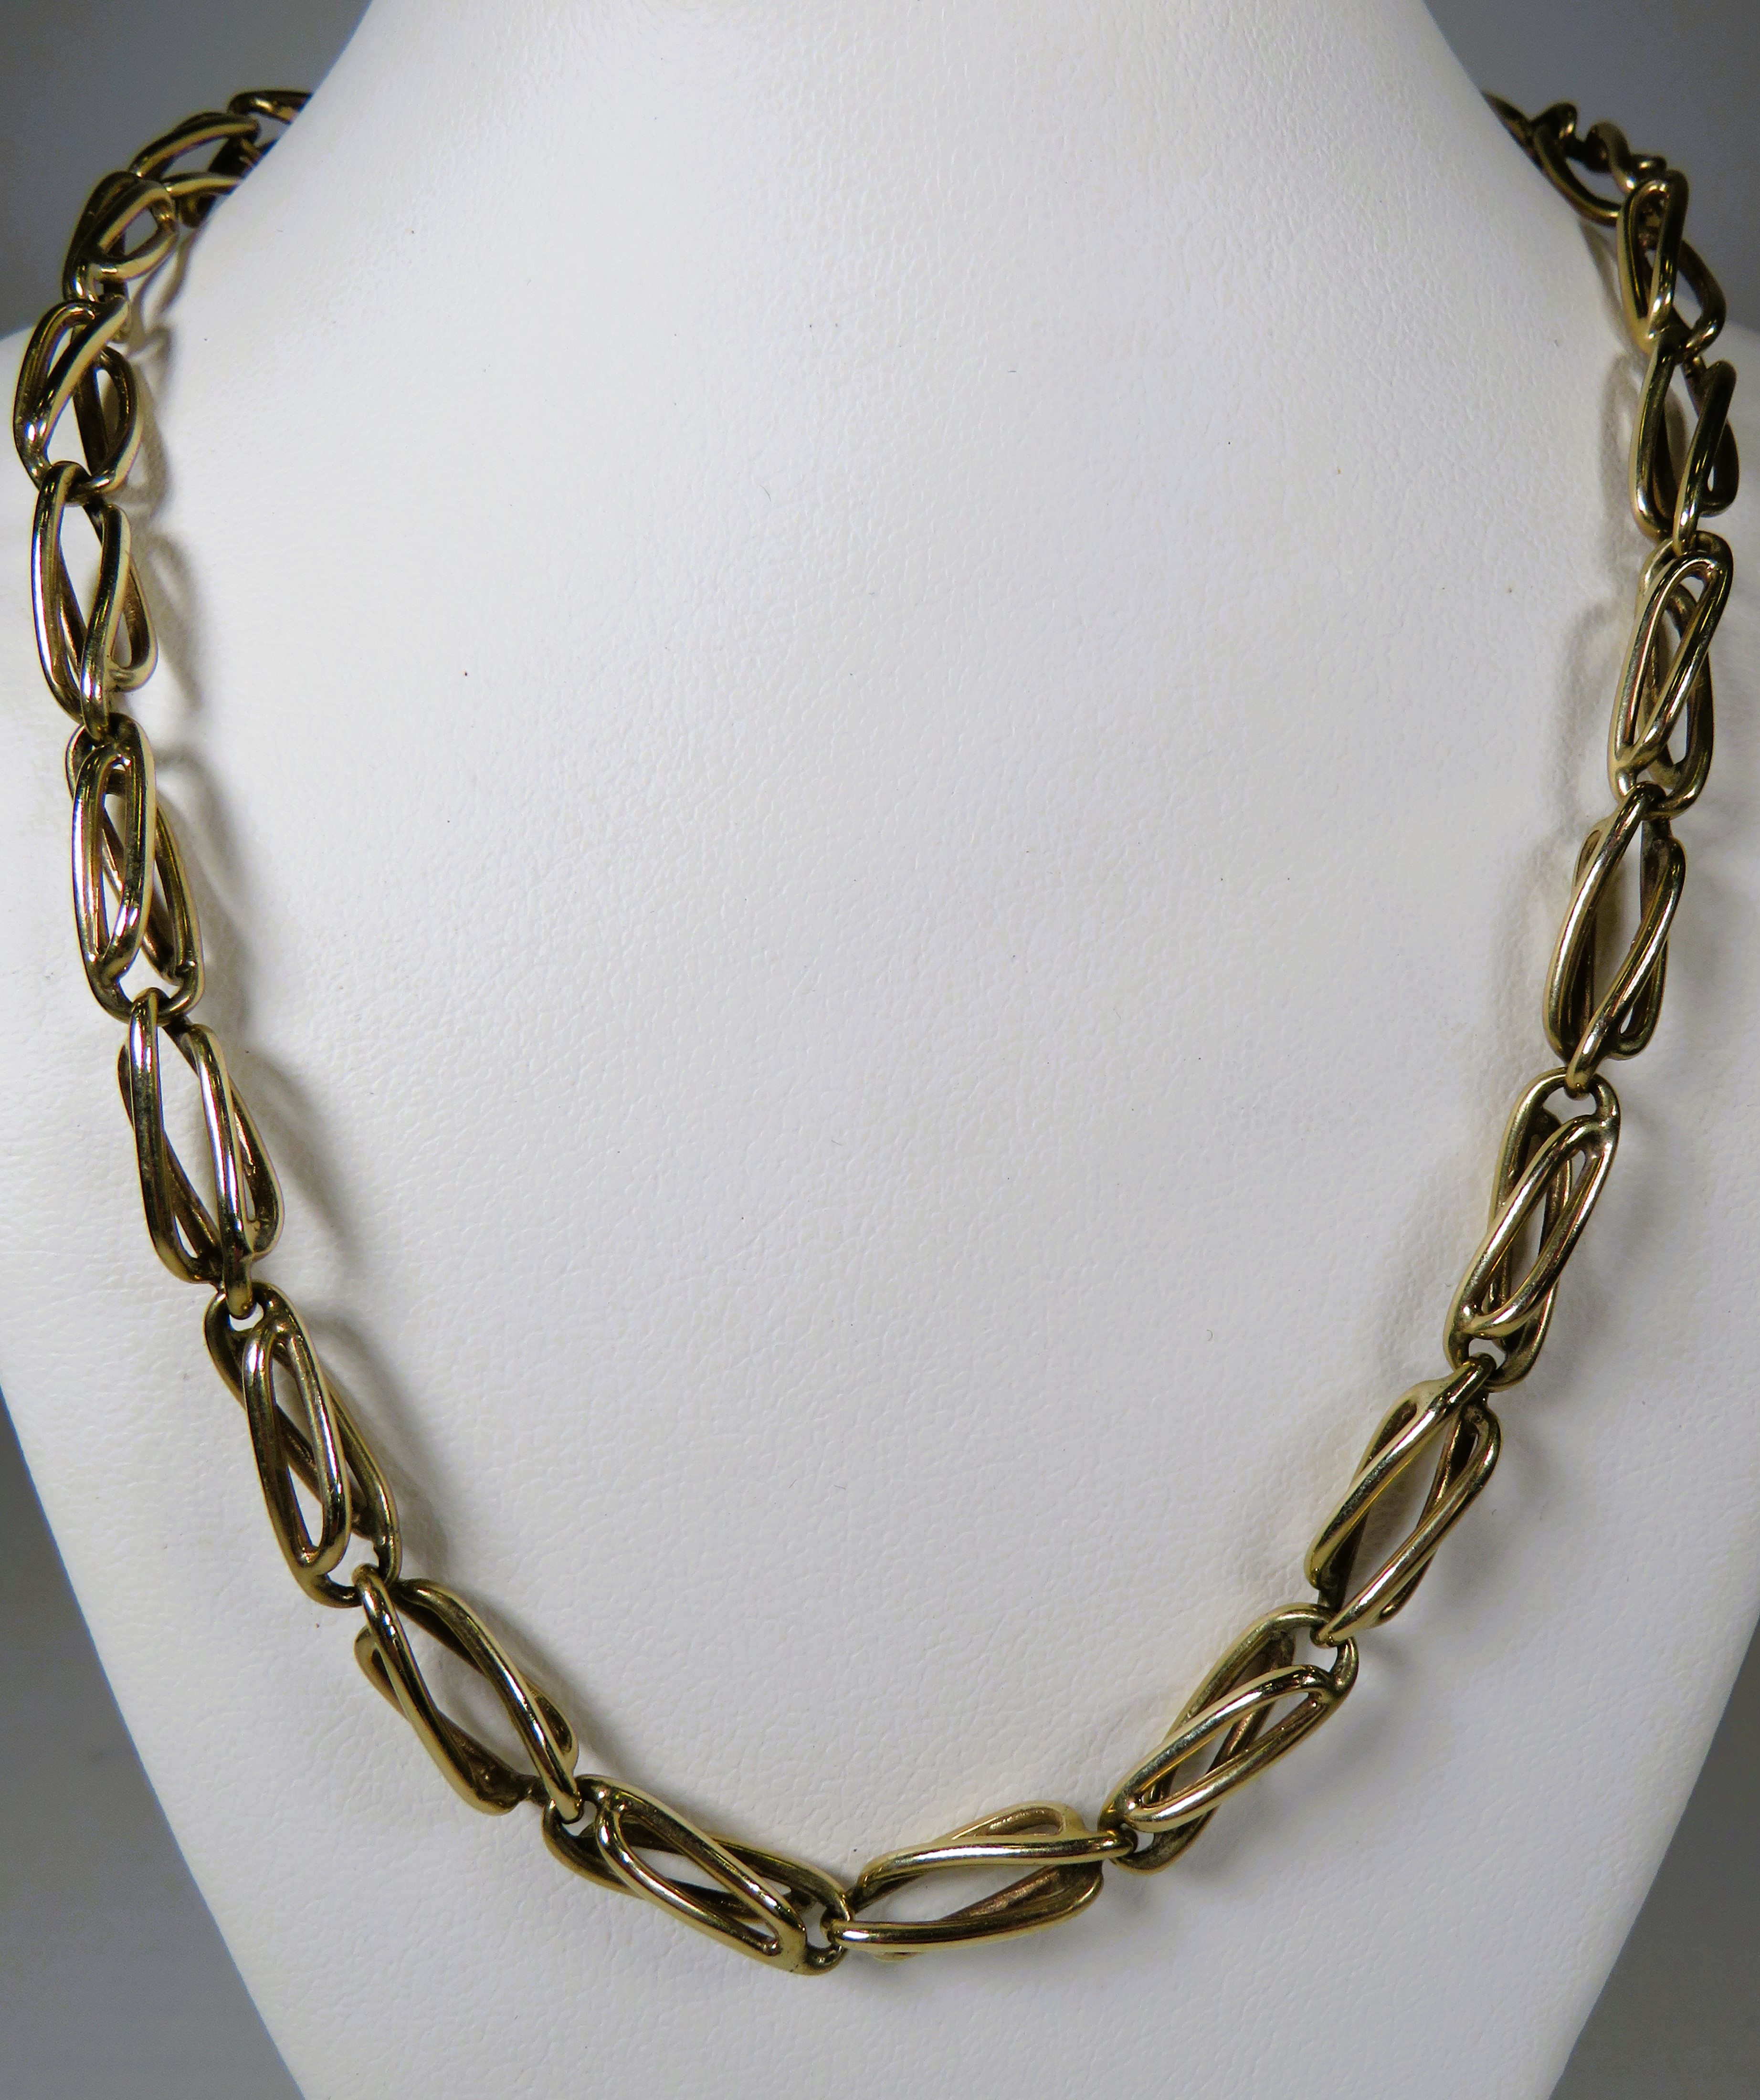 9ct Yellow Gold Chain made from Elongated Links. Measuring 18 inches long and weighs    31.2g - Image 2 of 2